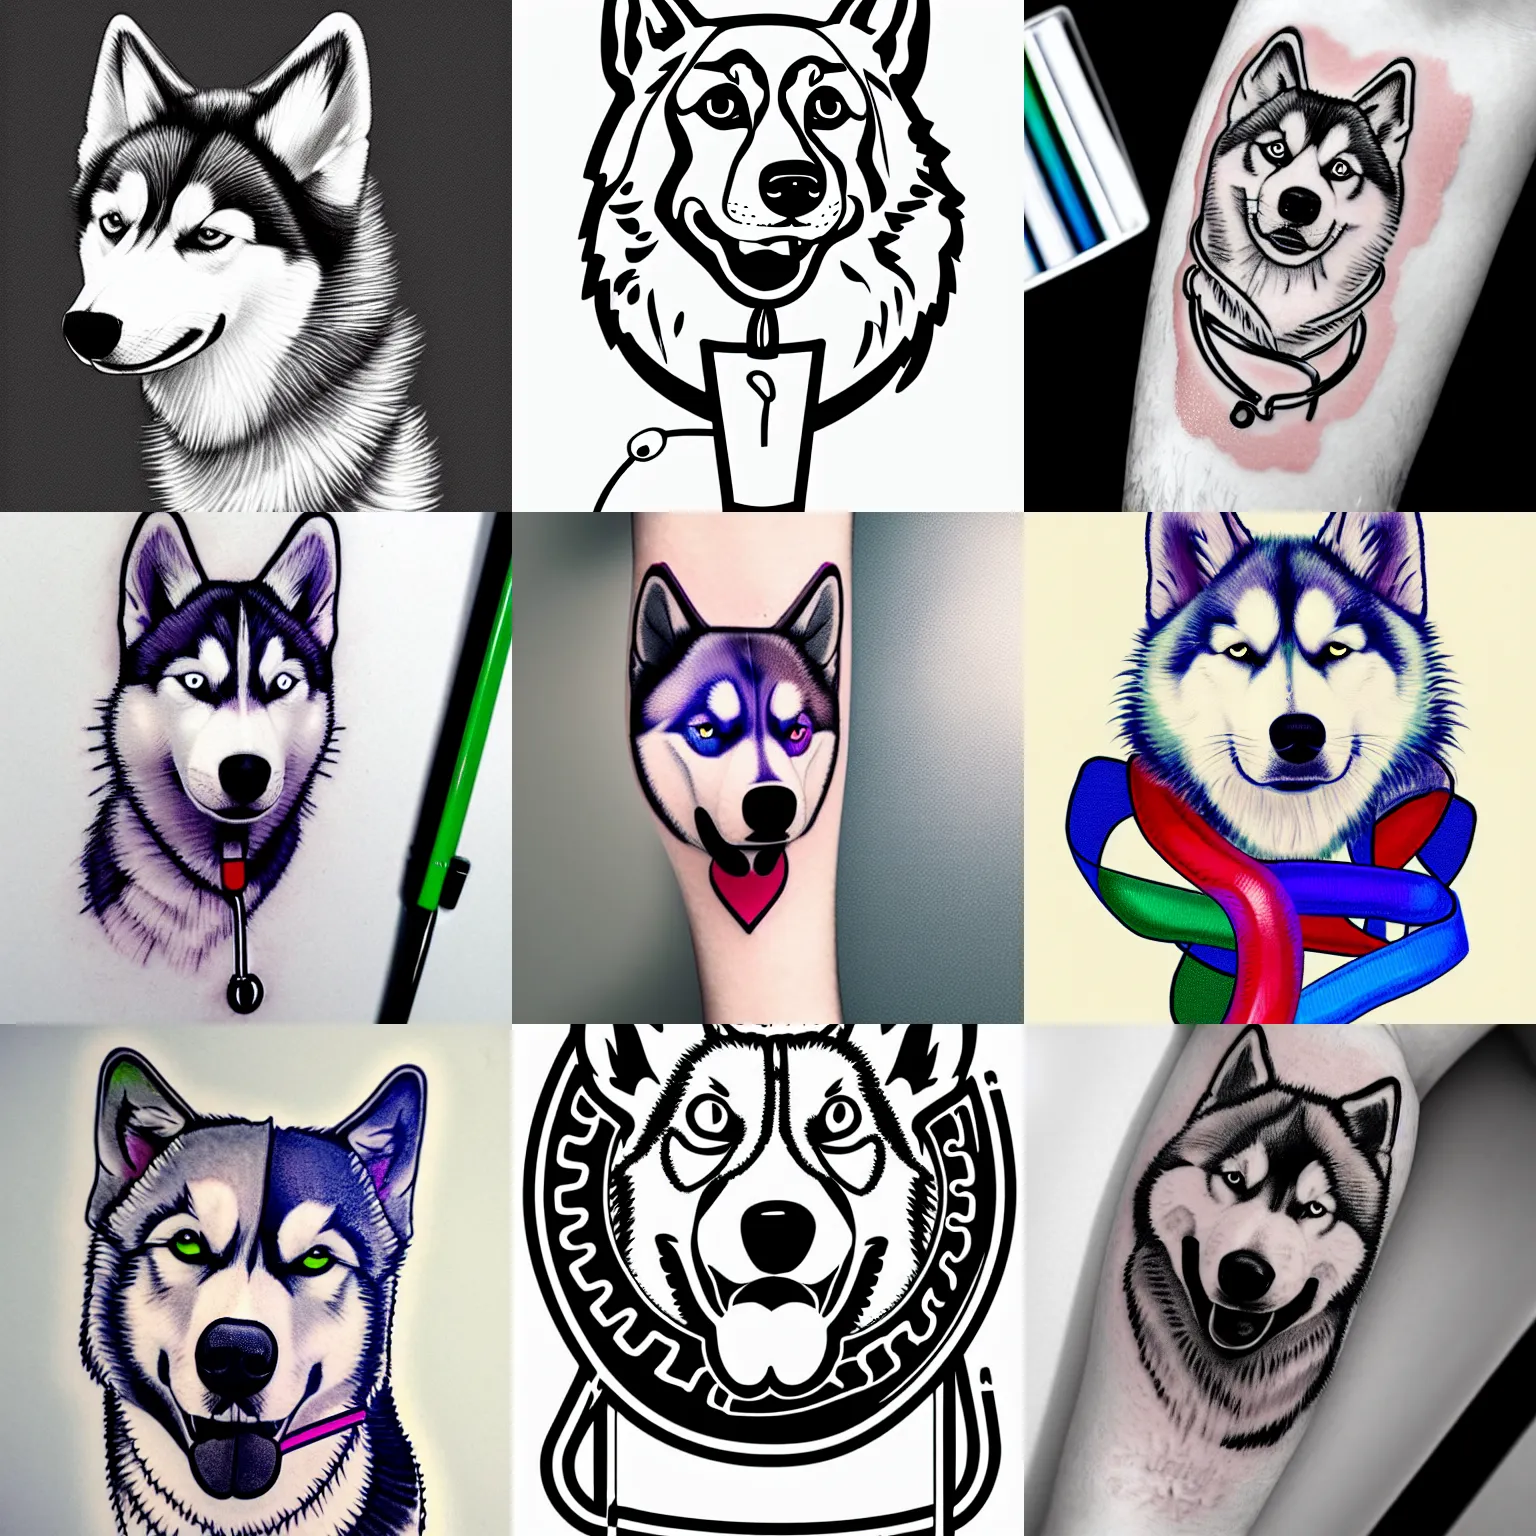 Bhavesh Kalma - For those who are fortunate enough to include a Siberian  Husky in their own family, those attributes are worth celebrating in ink.  With their multiple fur patterns, eye colors,